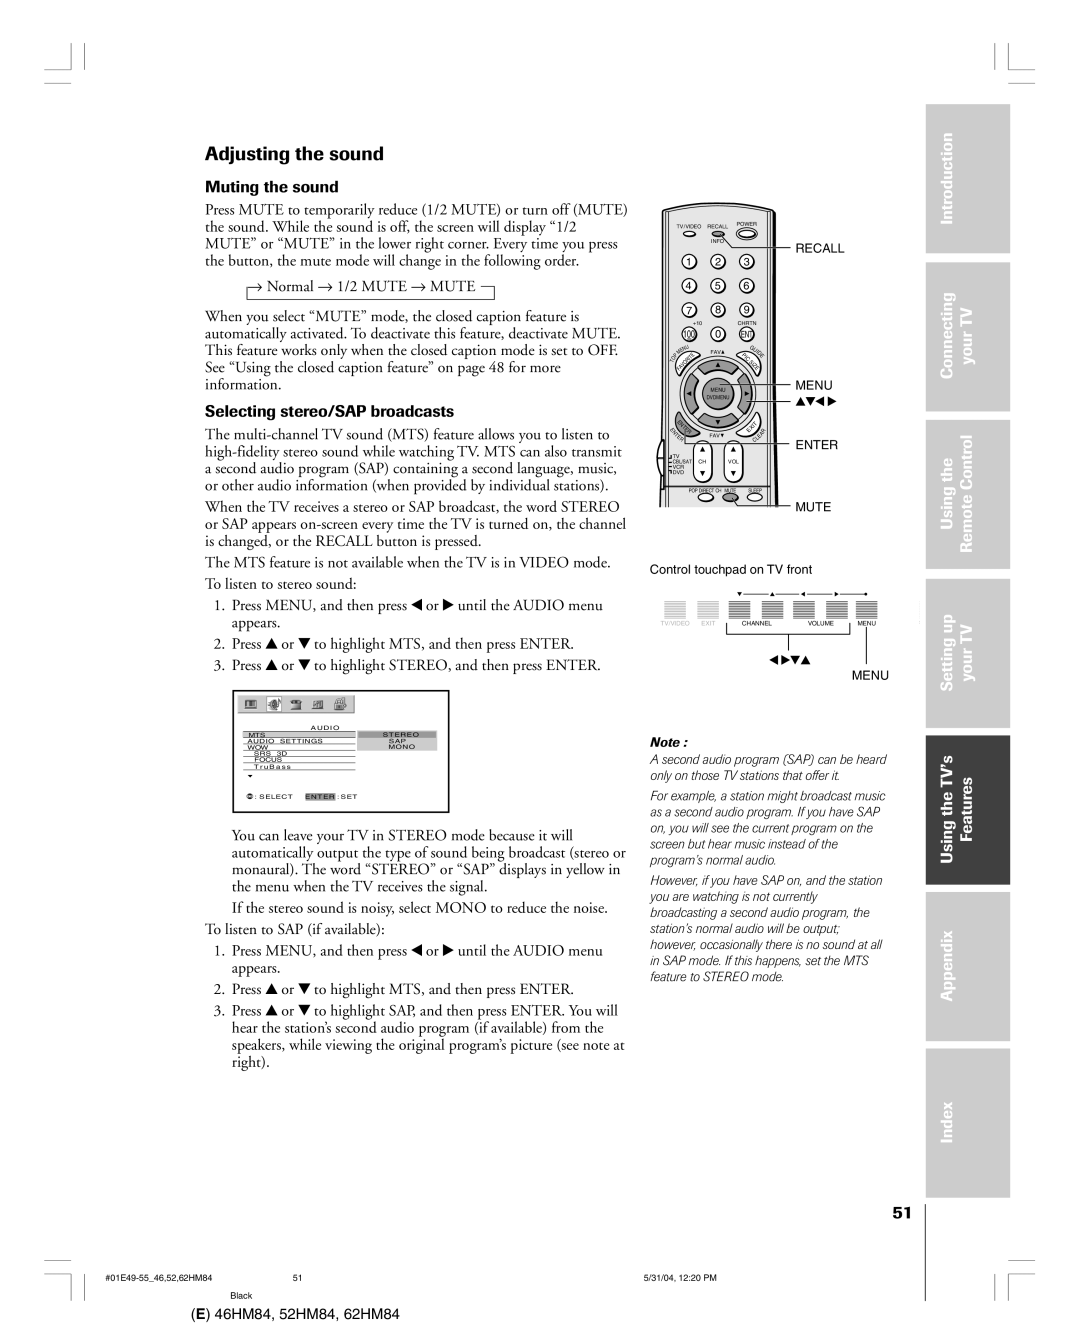 Toshiba 46HM84 owner manual Adjusting the sound, Muting the sound, Selecting stereo/SAP broadcasts 